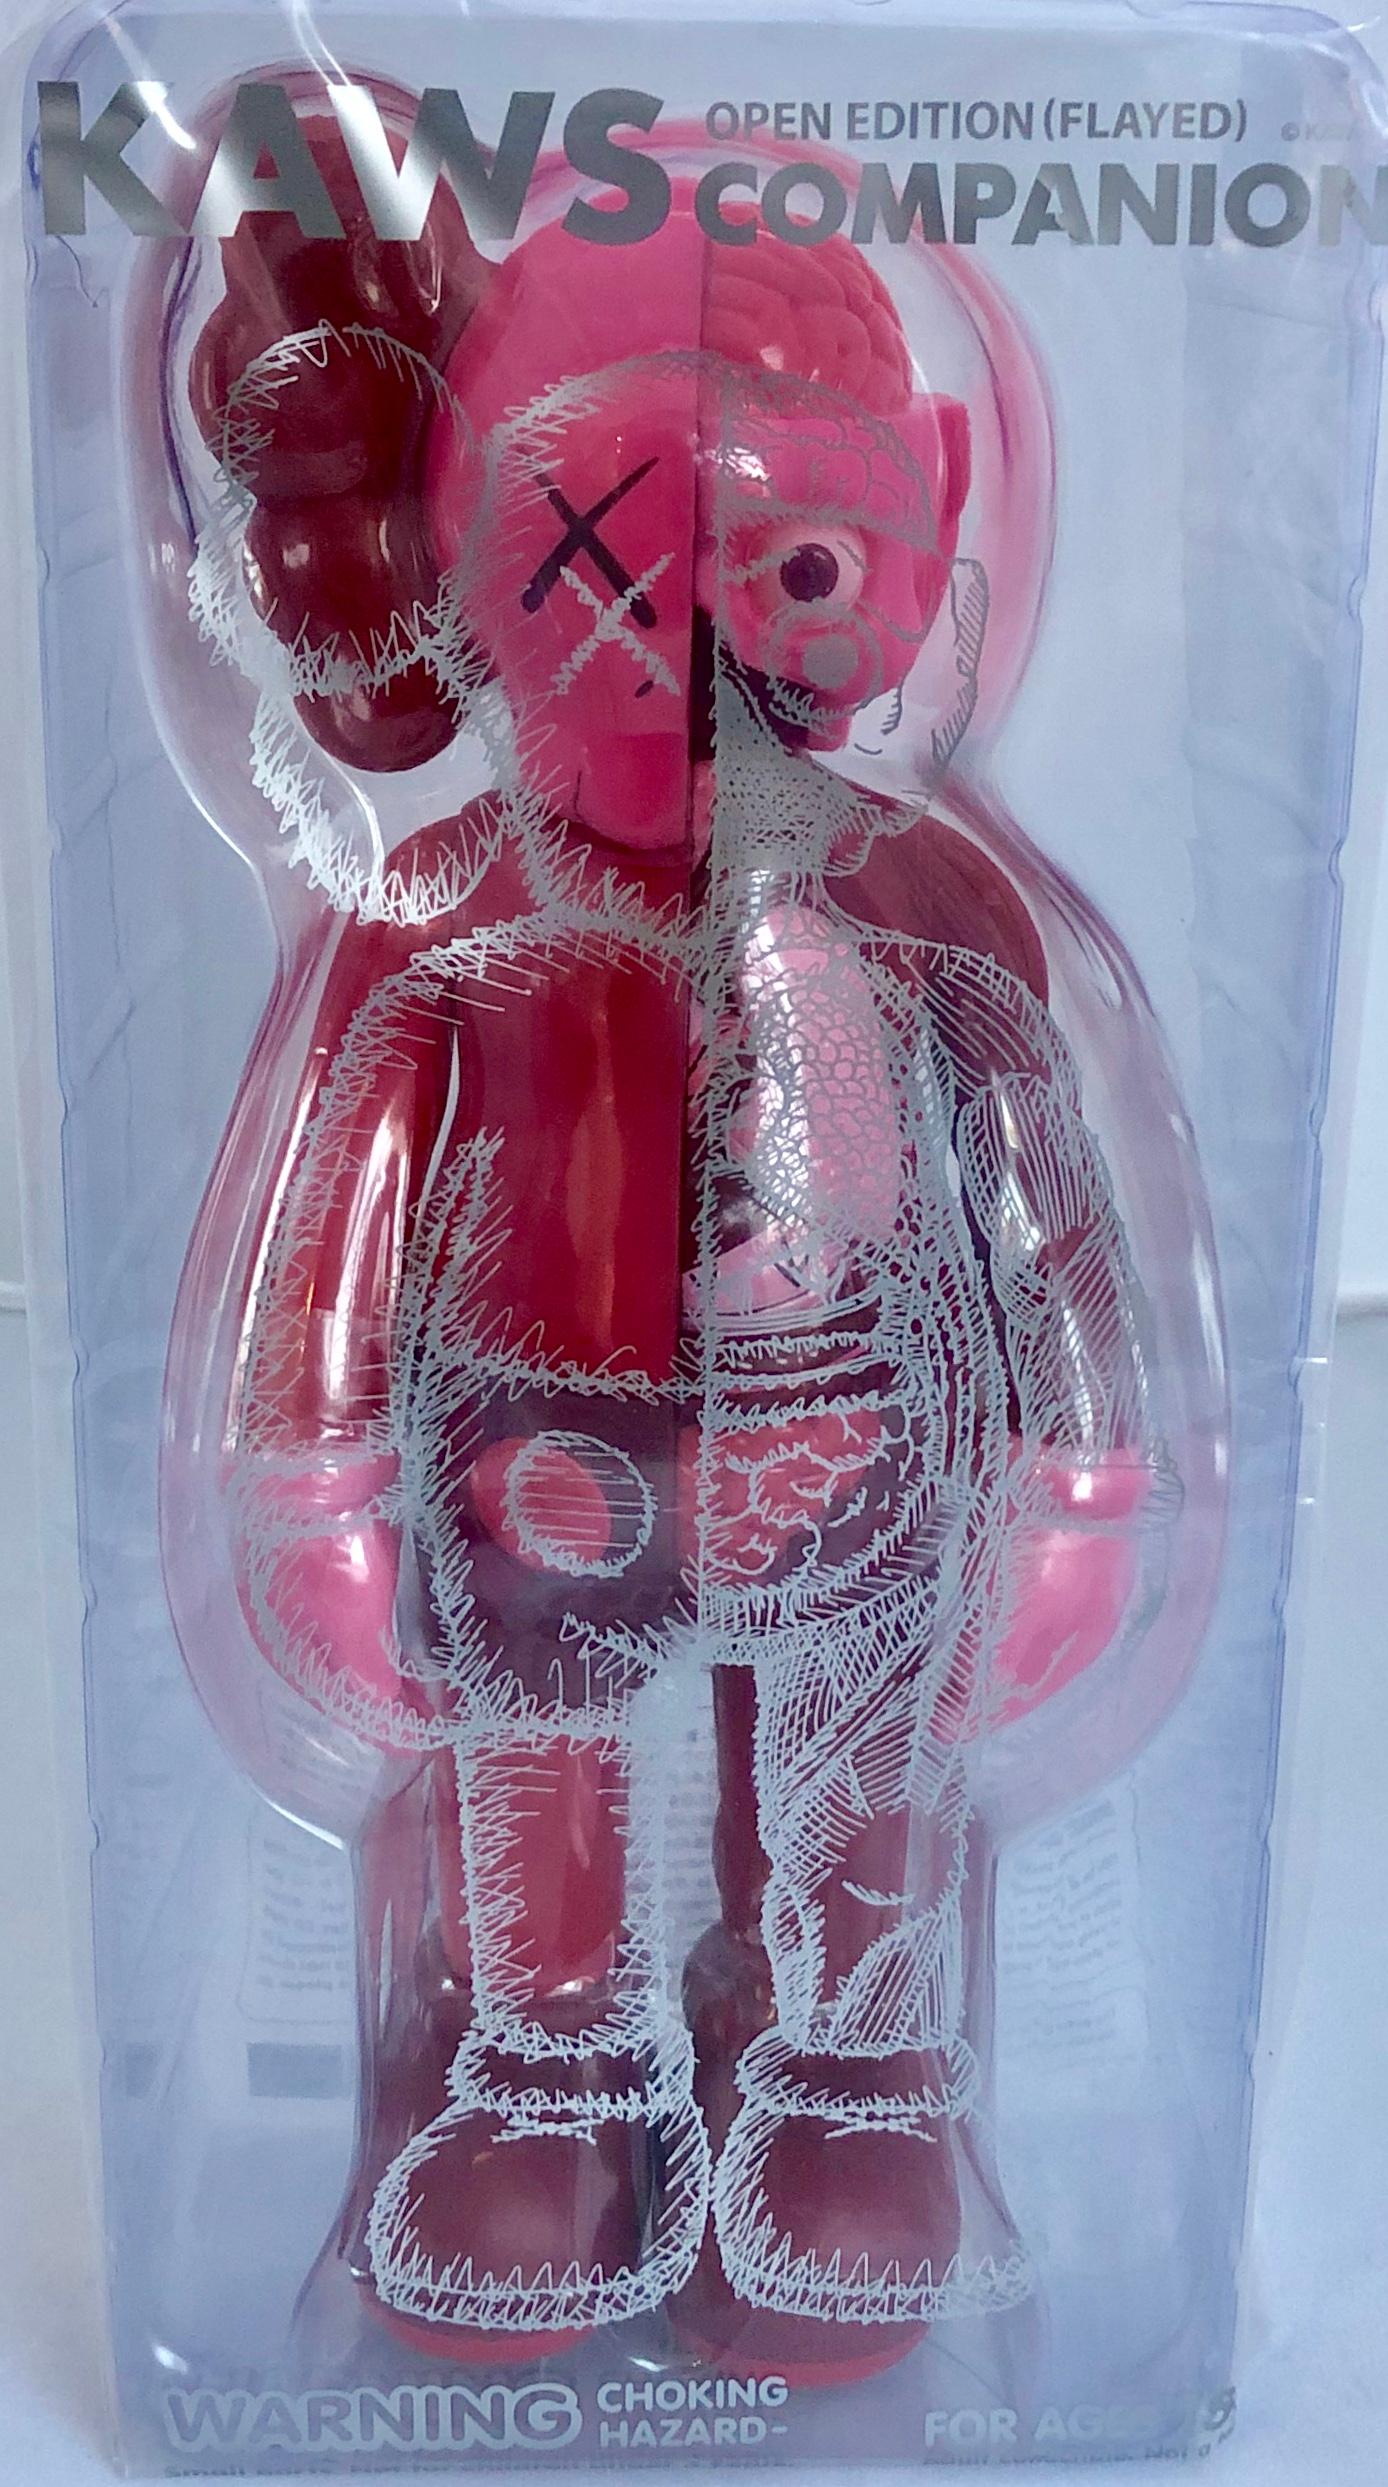 KAWS Blush Flayed Companion 2016: New and sealed in its original packaging. Published by Medicom Japan in conjunction with the exhibition, KAWS: Where The End Starts at the Modern Art Museum of Fort Worth. Never opened or displayed. 

Medium: Vinyl